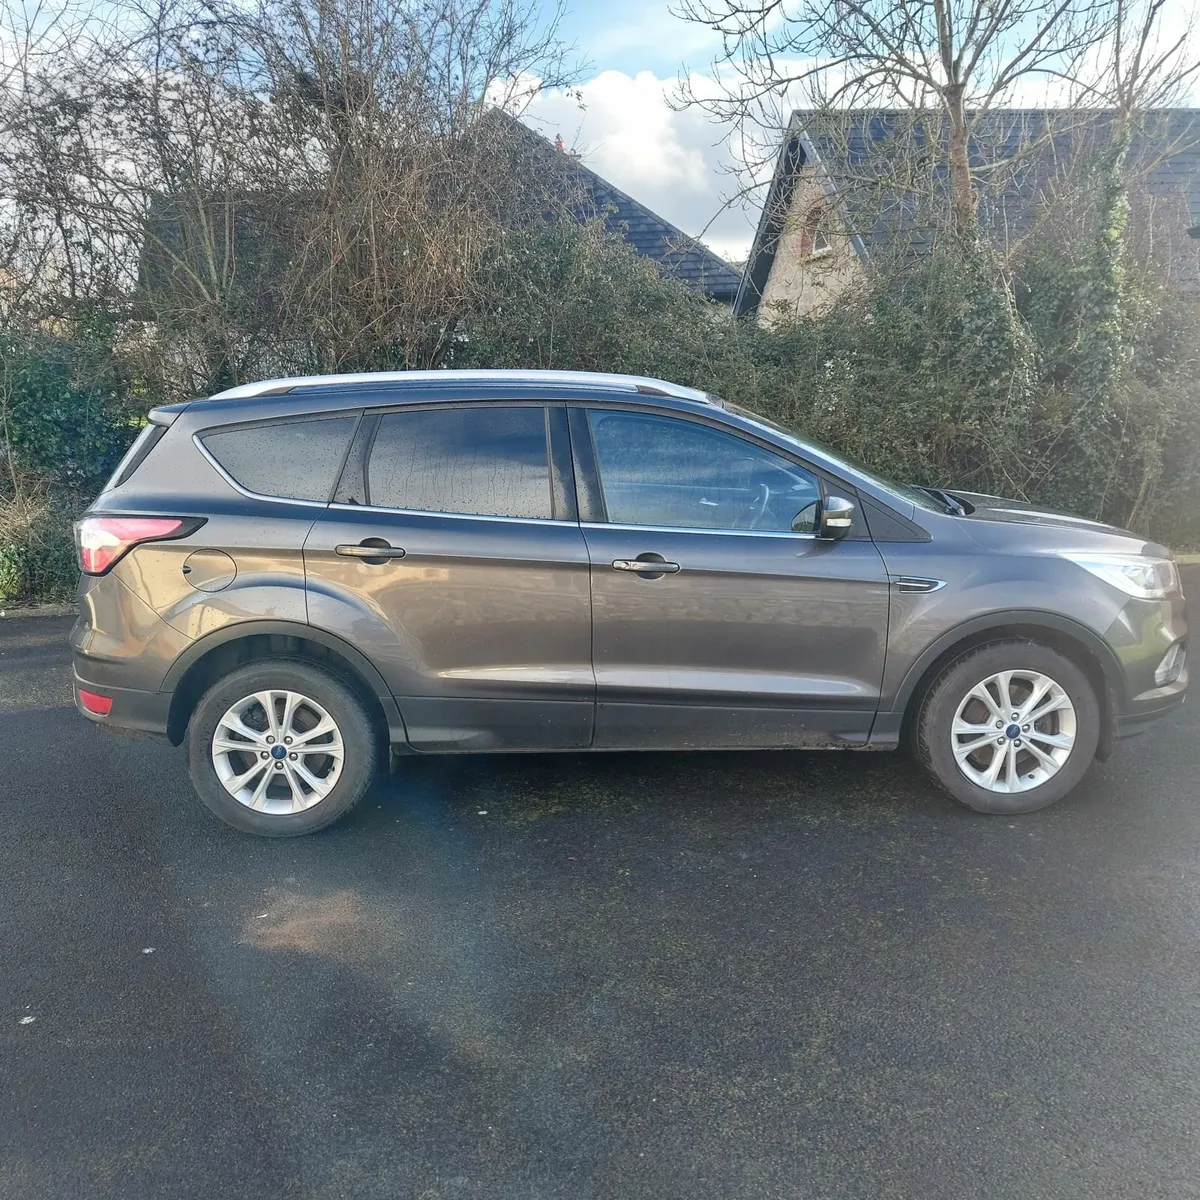 Ford Kuga 2018, 4 seater commercial